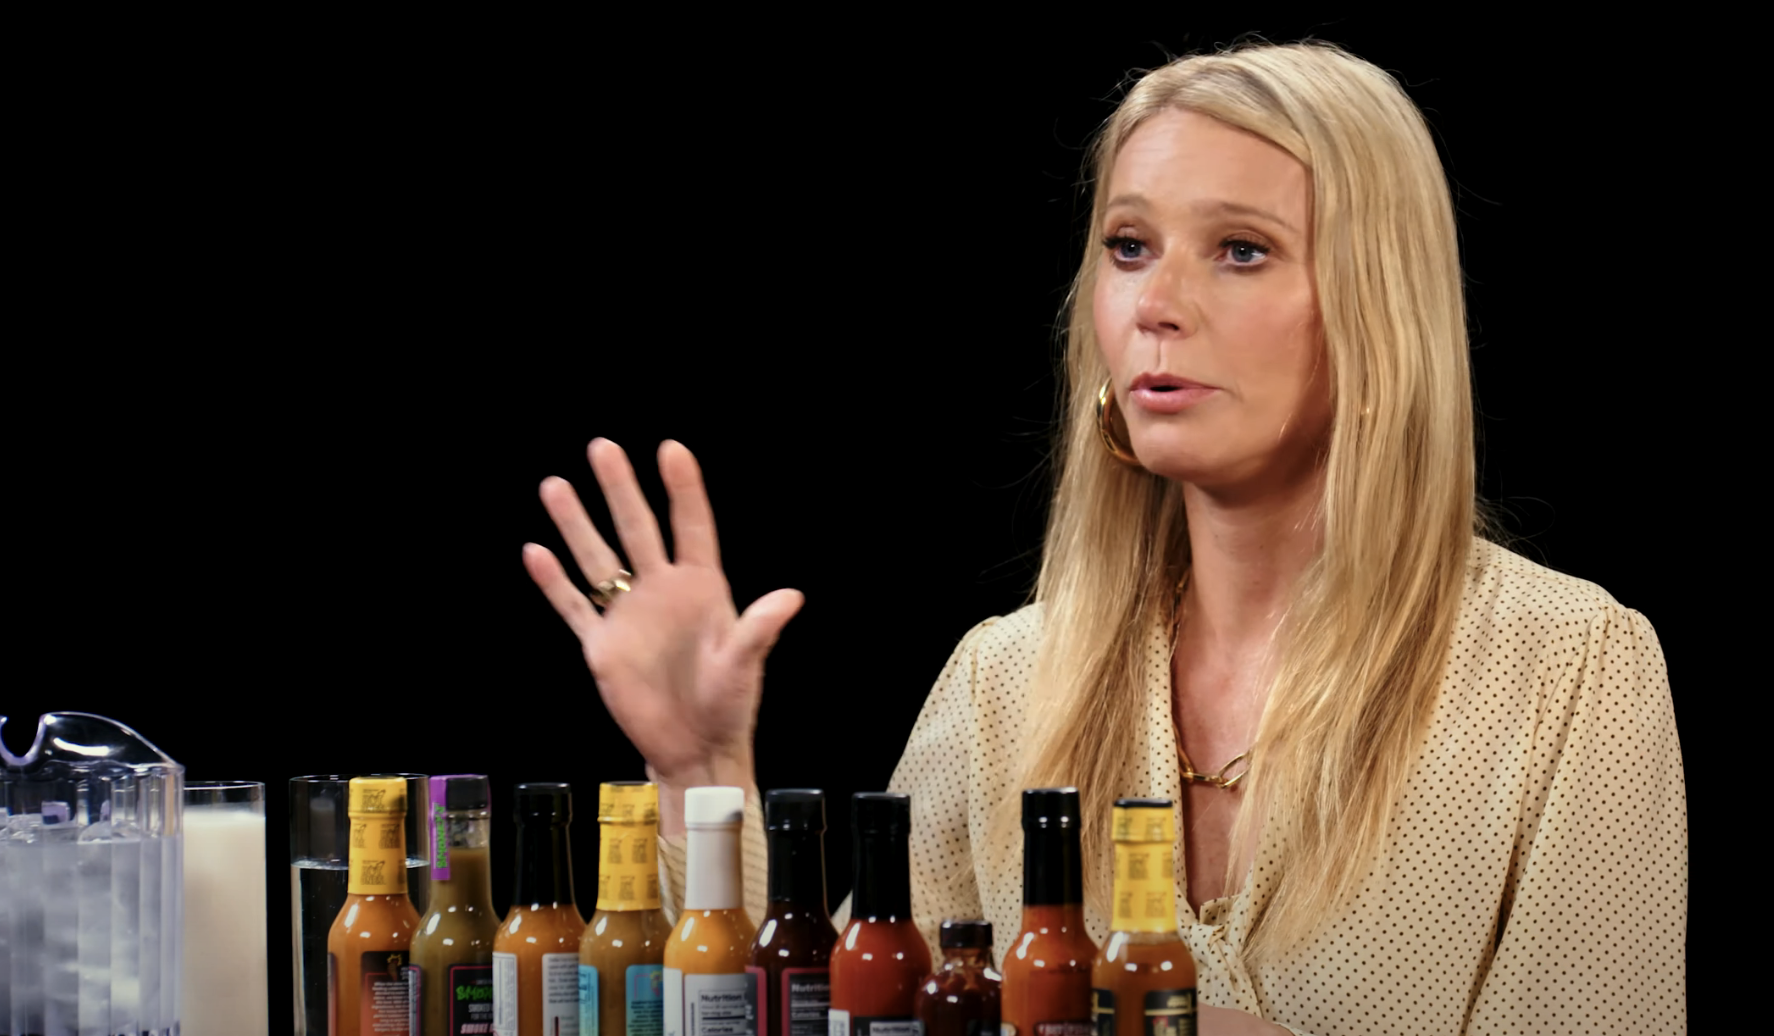 Gwyneth gesturing during an interview, with a lineup of hot sauce bottles on the table